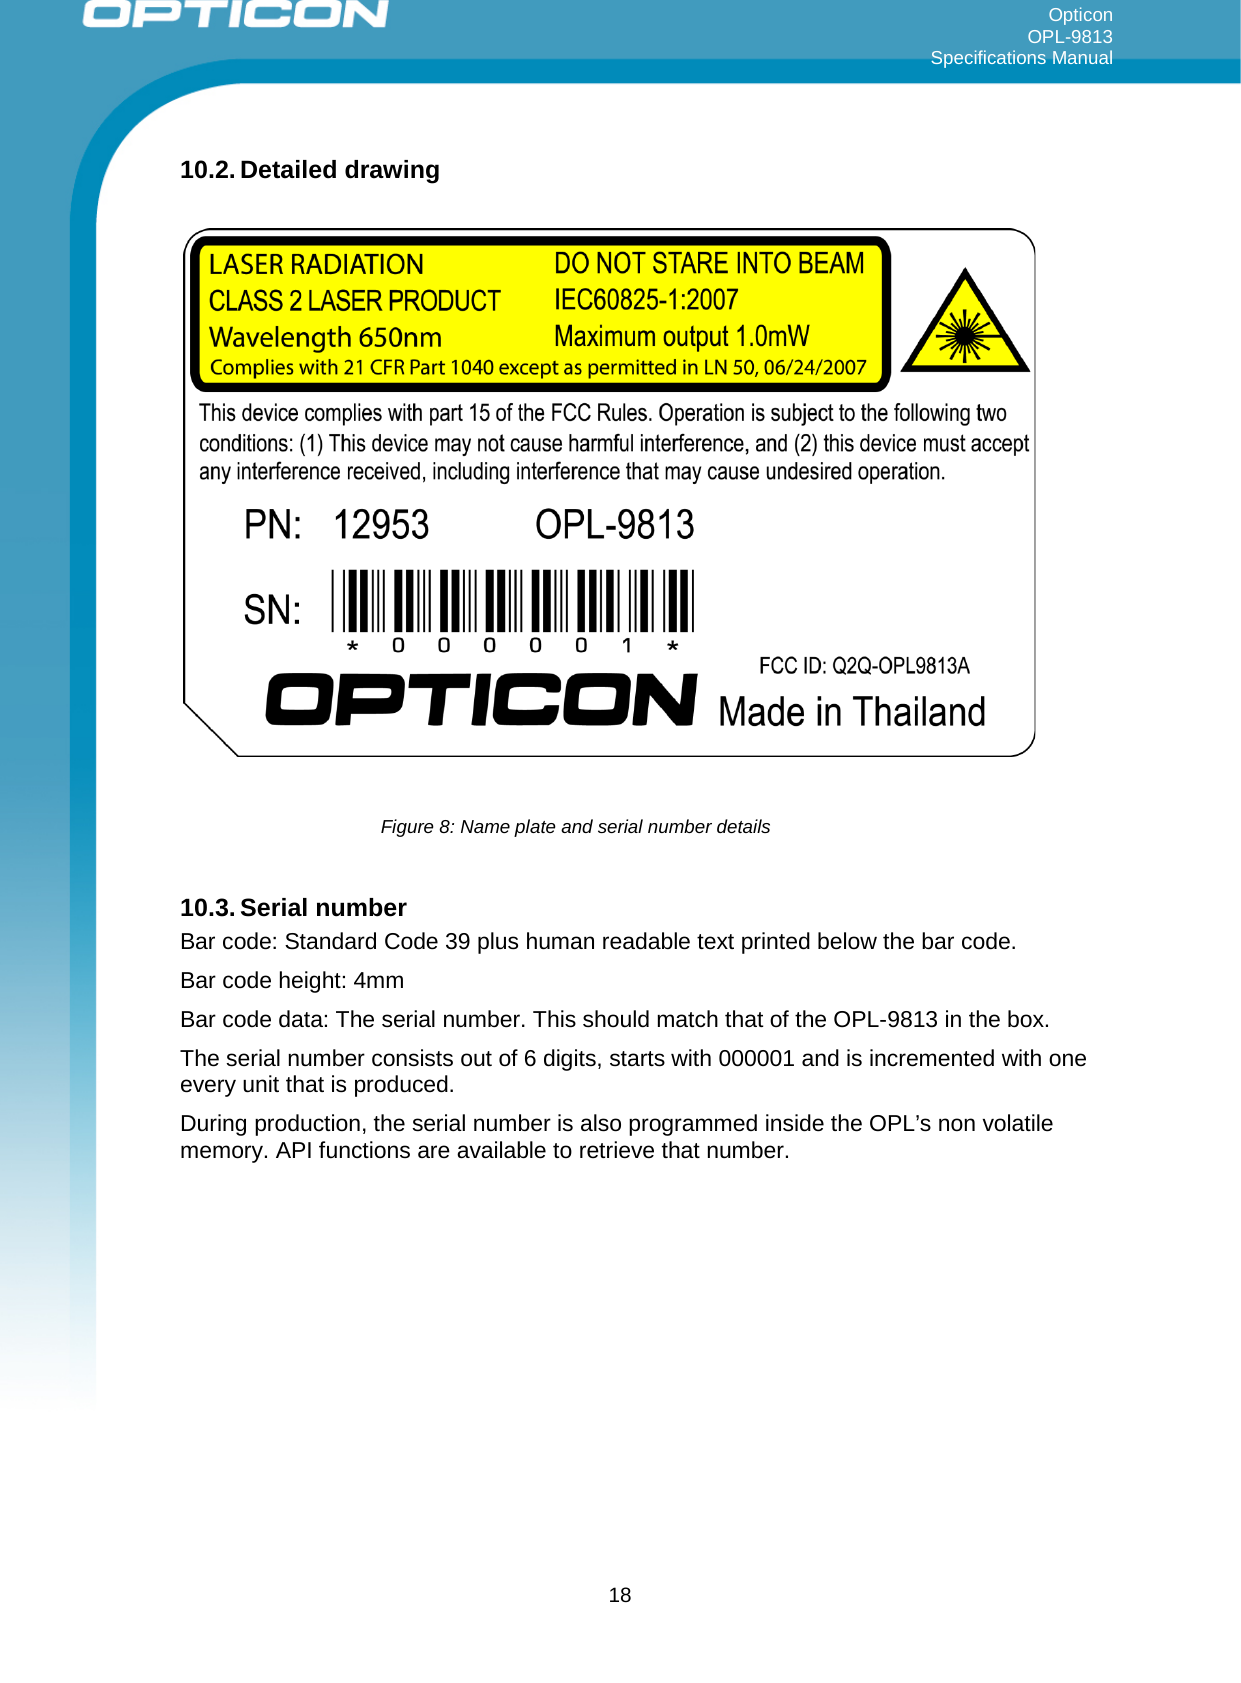 Opticon OPL-9813 Specifications Manual     10.2. Detailed drawing       10.3. Serial number Bar code: Standard Code 39 plus human readable text printed below the bar code. Bar code height: 4mm Bar code data: The serial number. This should match that of the OPL-9813 in the box. The serial number consists out of 6 digits, starts with 000001 and is incremented with one every unit that is produced. During production, the serial number is also programmed inside the OPL’s non volatile memory. API functions are available to retrieve that number.    Figure 8: Name plate and serial number details  18 